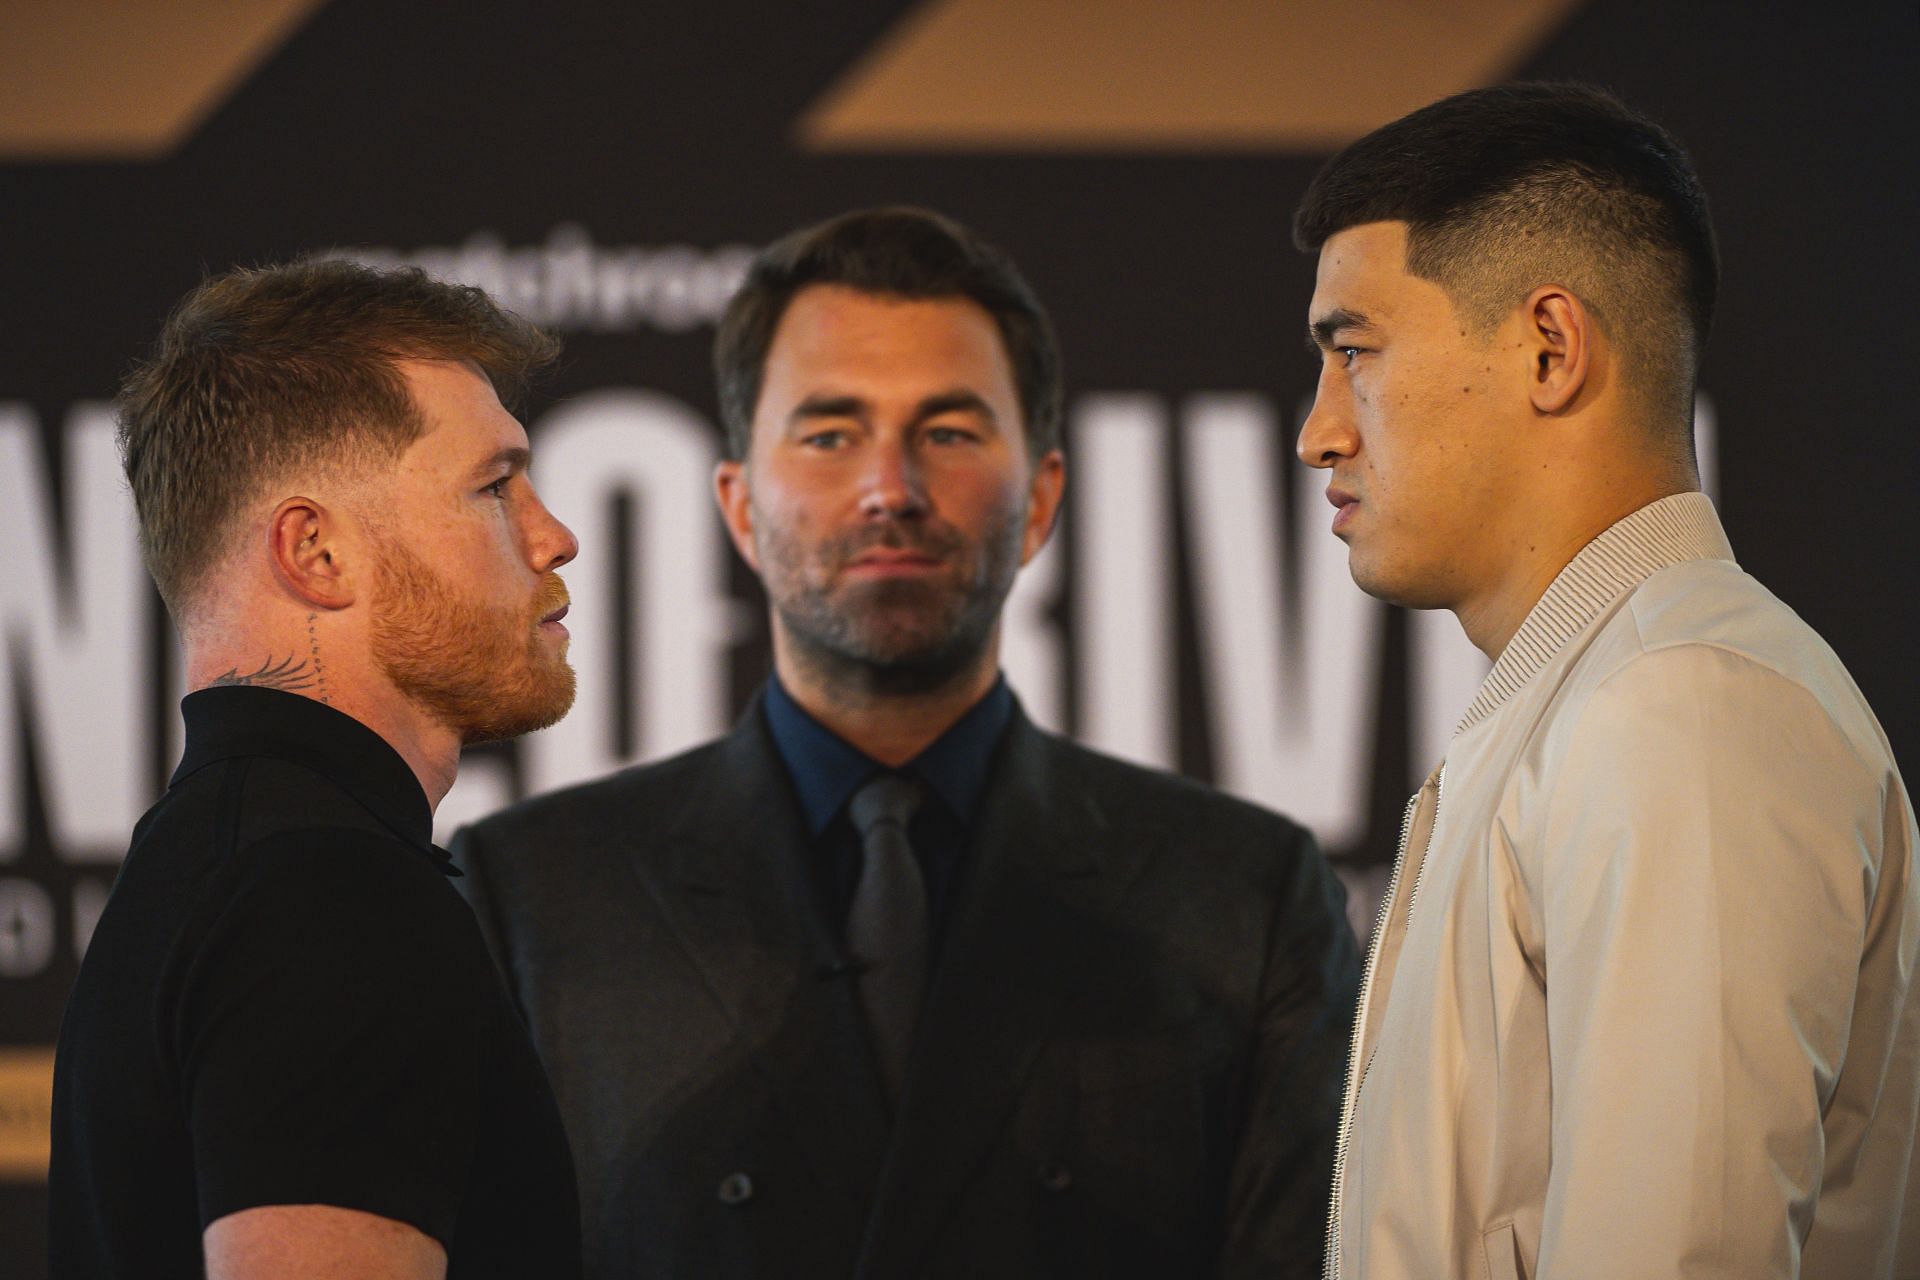 Canelo Alvarez (left), Eddie Hearn (center) and Dmitry Bivol (right) at a press conference before the big fight.